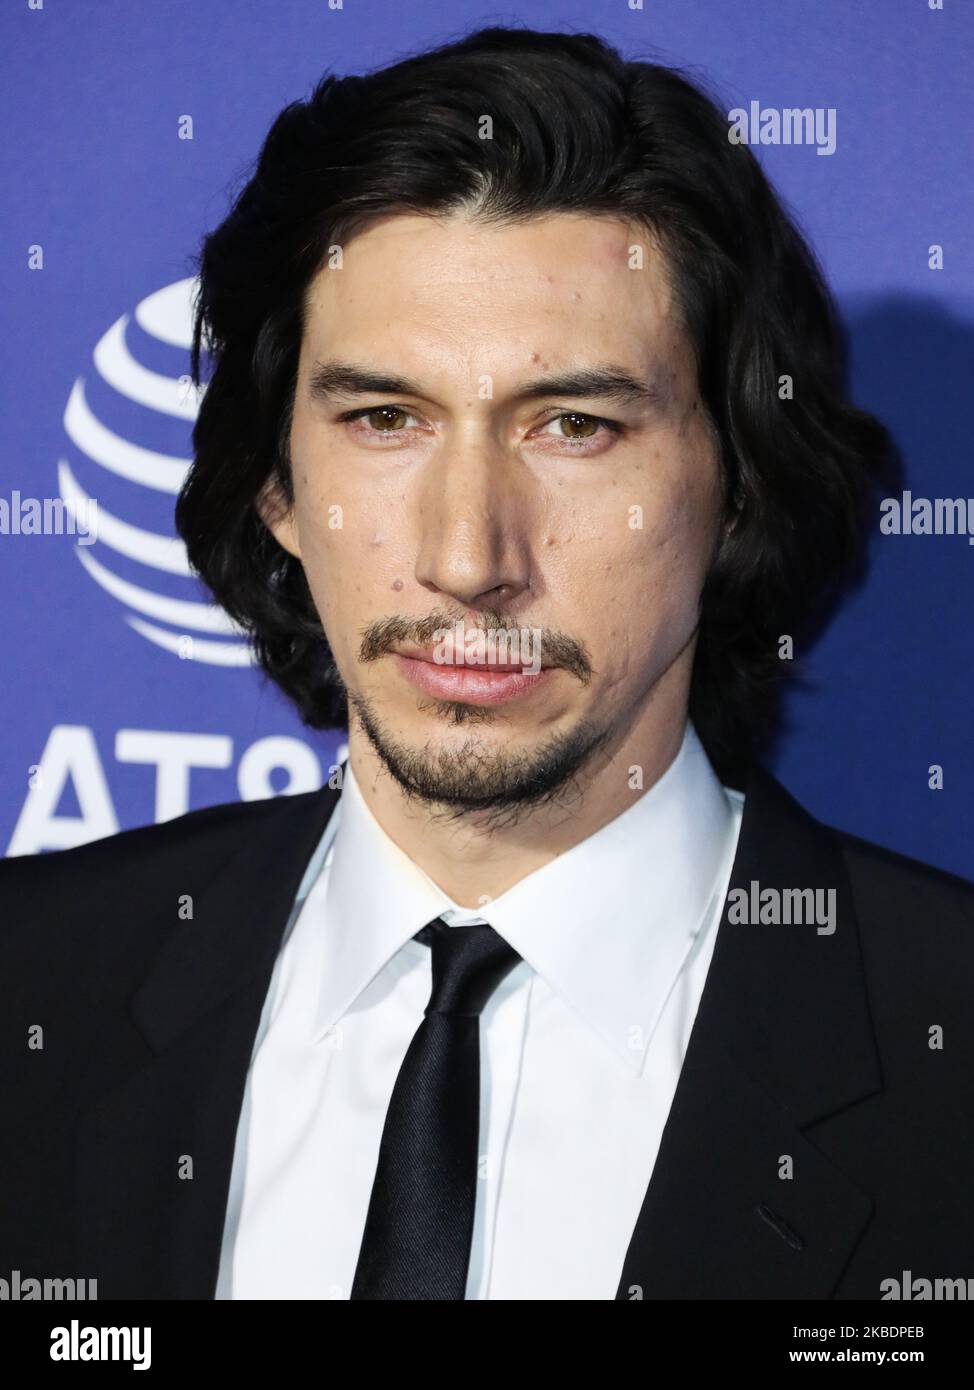 PALM SPRINGS, CALIFORNIA, USA - JANUARY 02: Adam Driver arrives at the 31st Annual Palm Springs International Film Festival Awards Gala held at the Palm Springs Convention Center on January 2, 2020 in Palm Springs, California, United States. (Photo by Xavier Collin/Image Press Agency/NurPhoto) Stock Photo